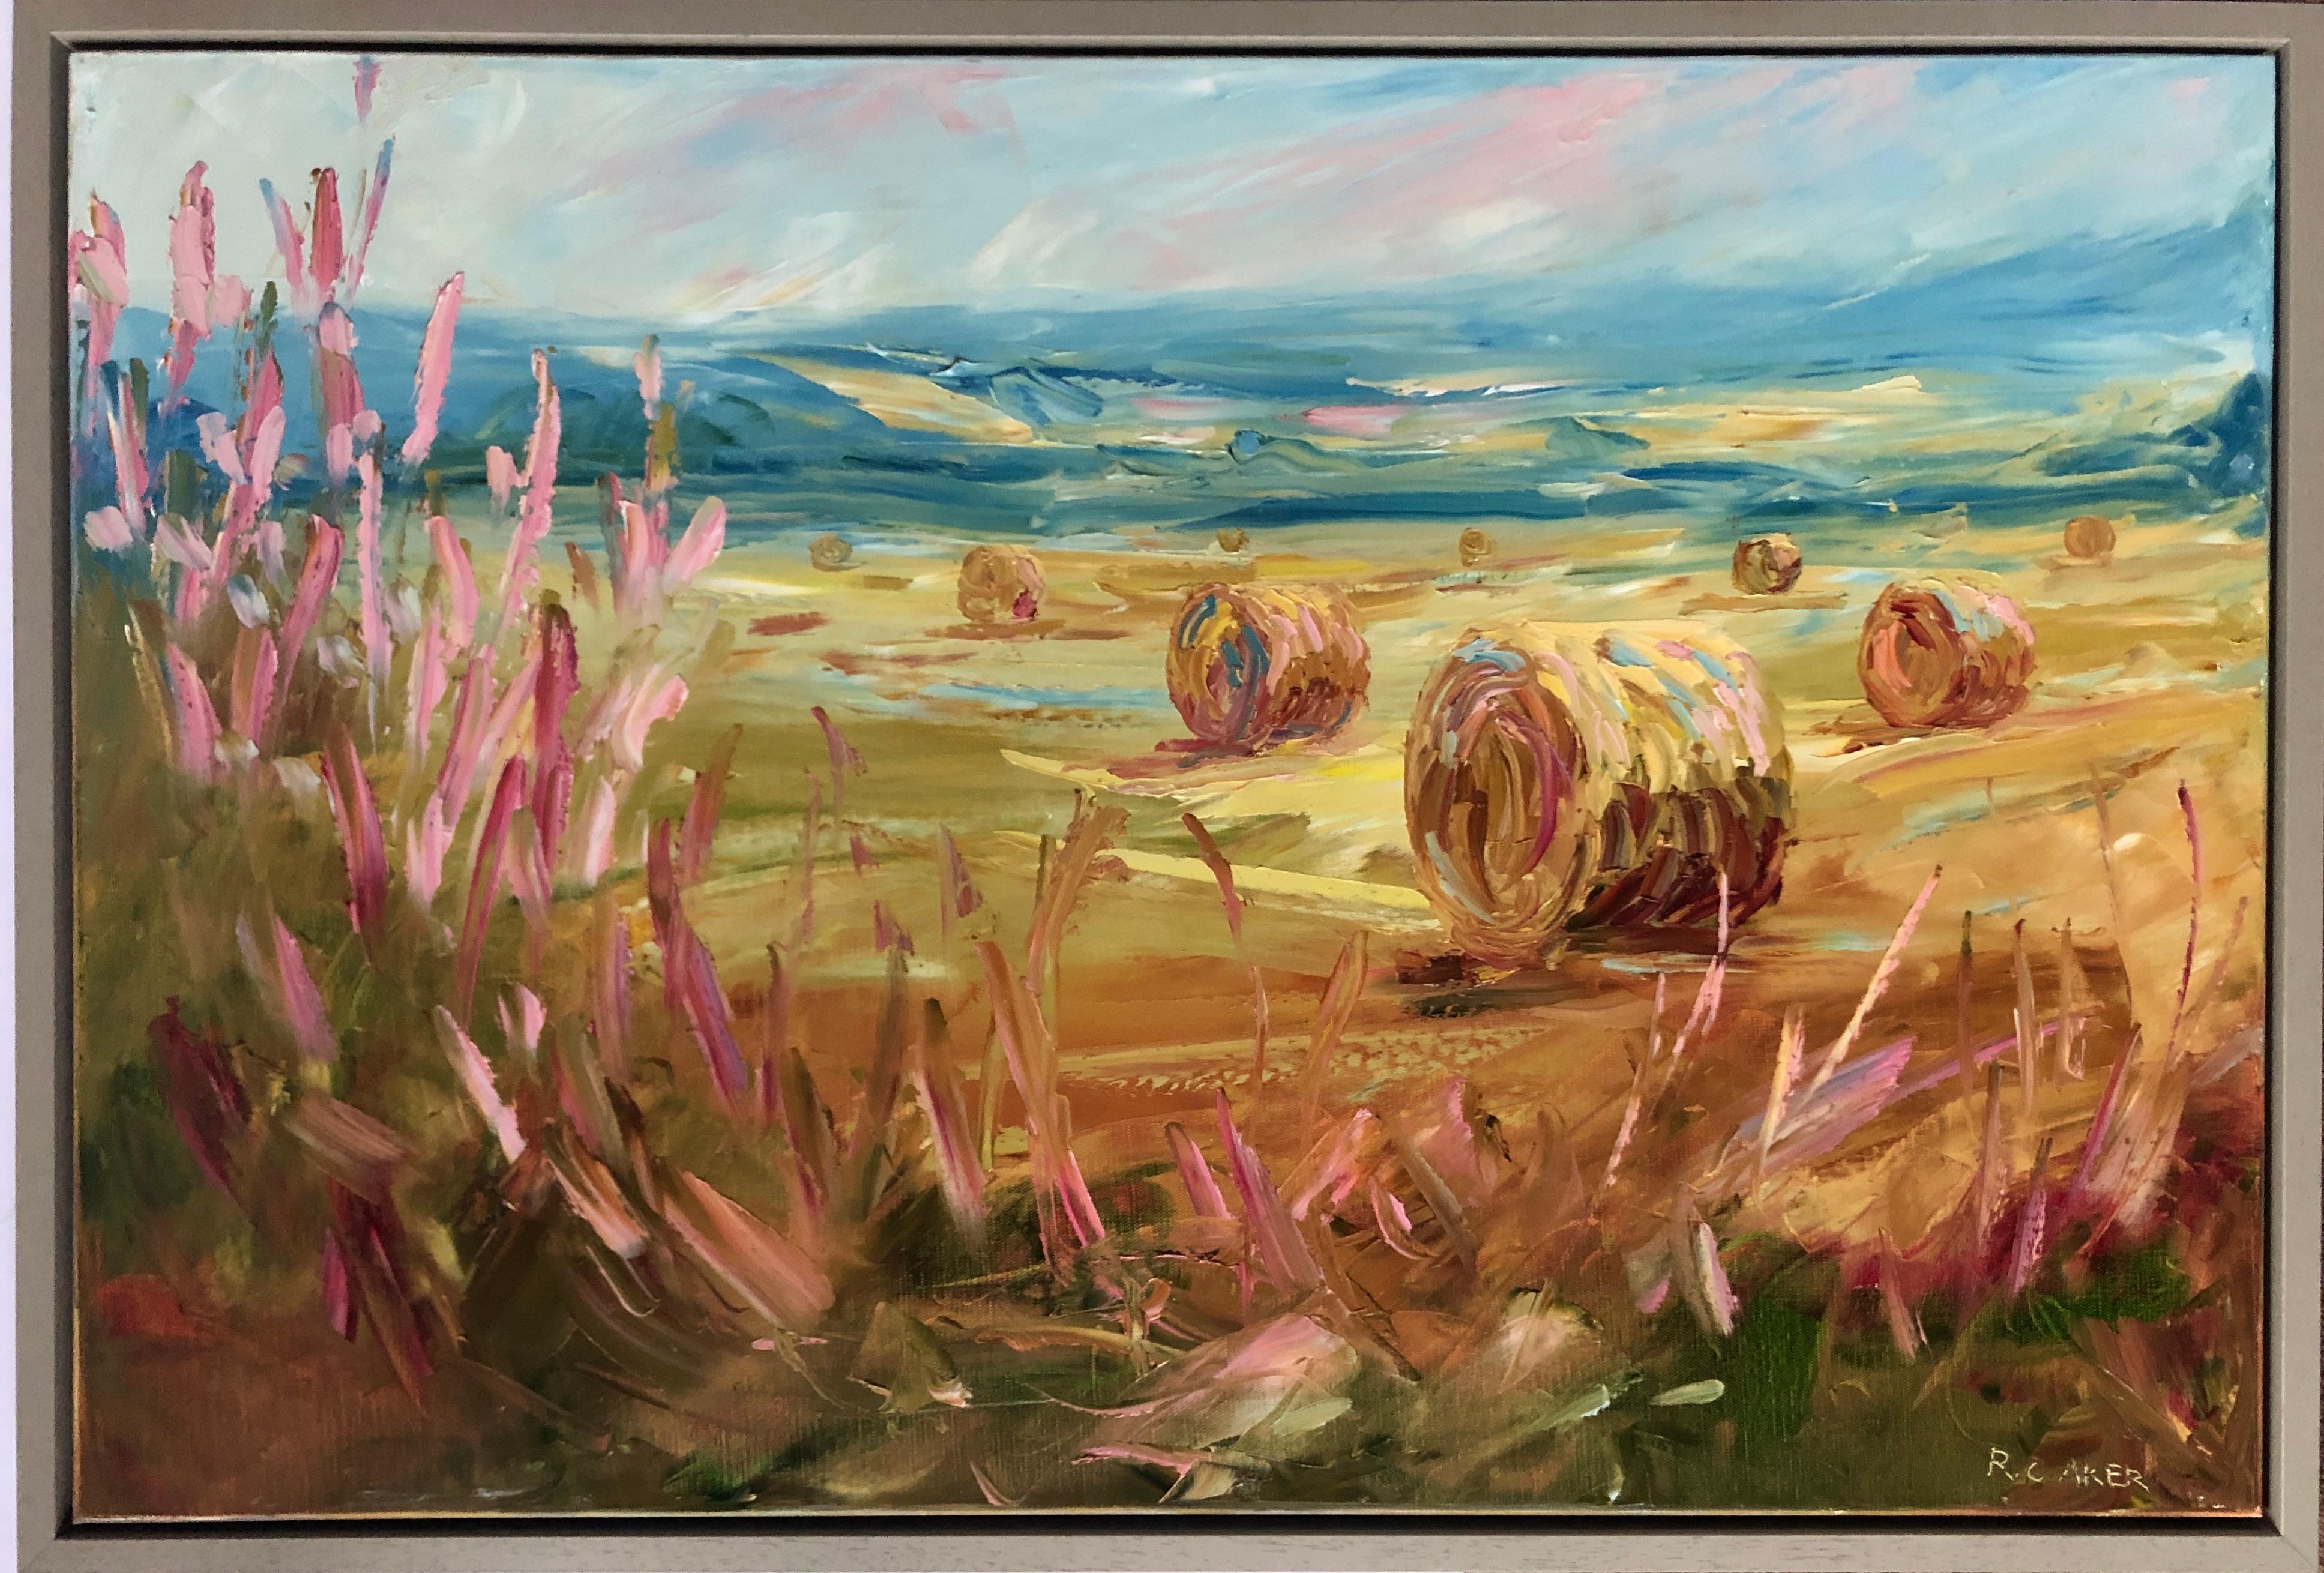 Rupert Aker
Big Bales, Late Summer
Original Landscape Painting
Oil Paint on Canvas Board
Image Size: H 61cm x W 91cm x D 1cm
Frame Size: H 63cm x W 95.5cm x D 4.5cm
Sold Framed in a Sage Green Frame
Free Shipping

Big Bales, Late Summer is an